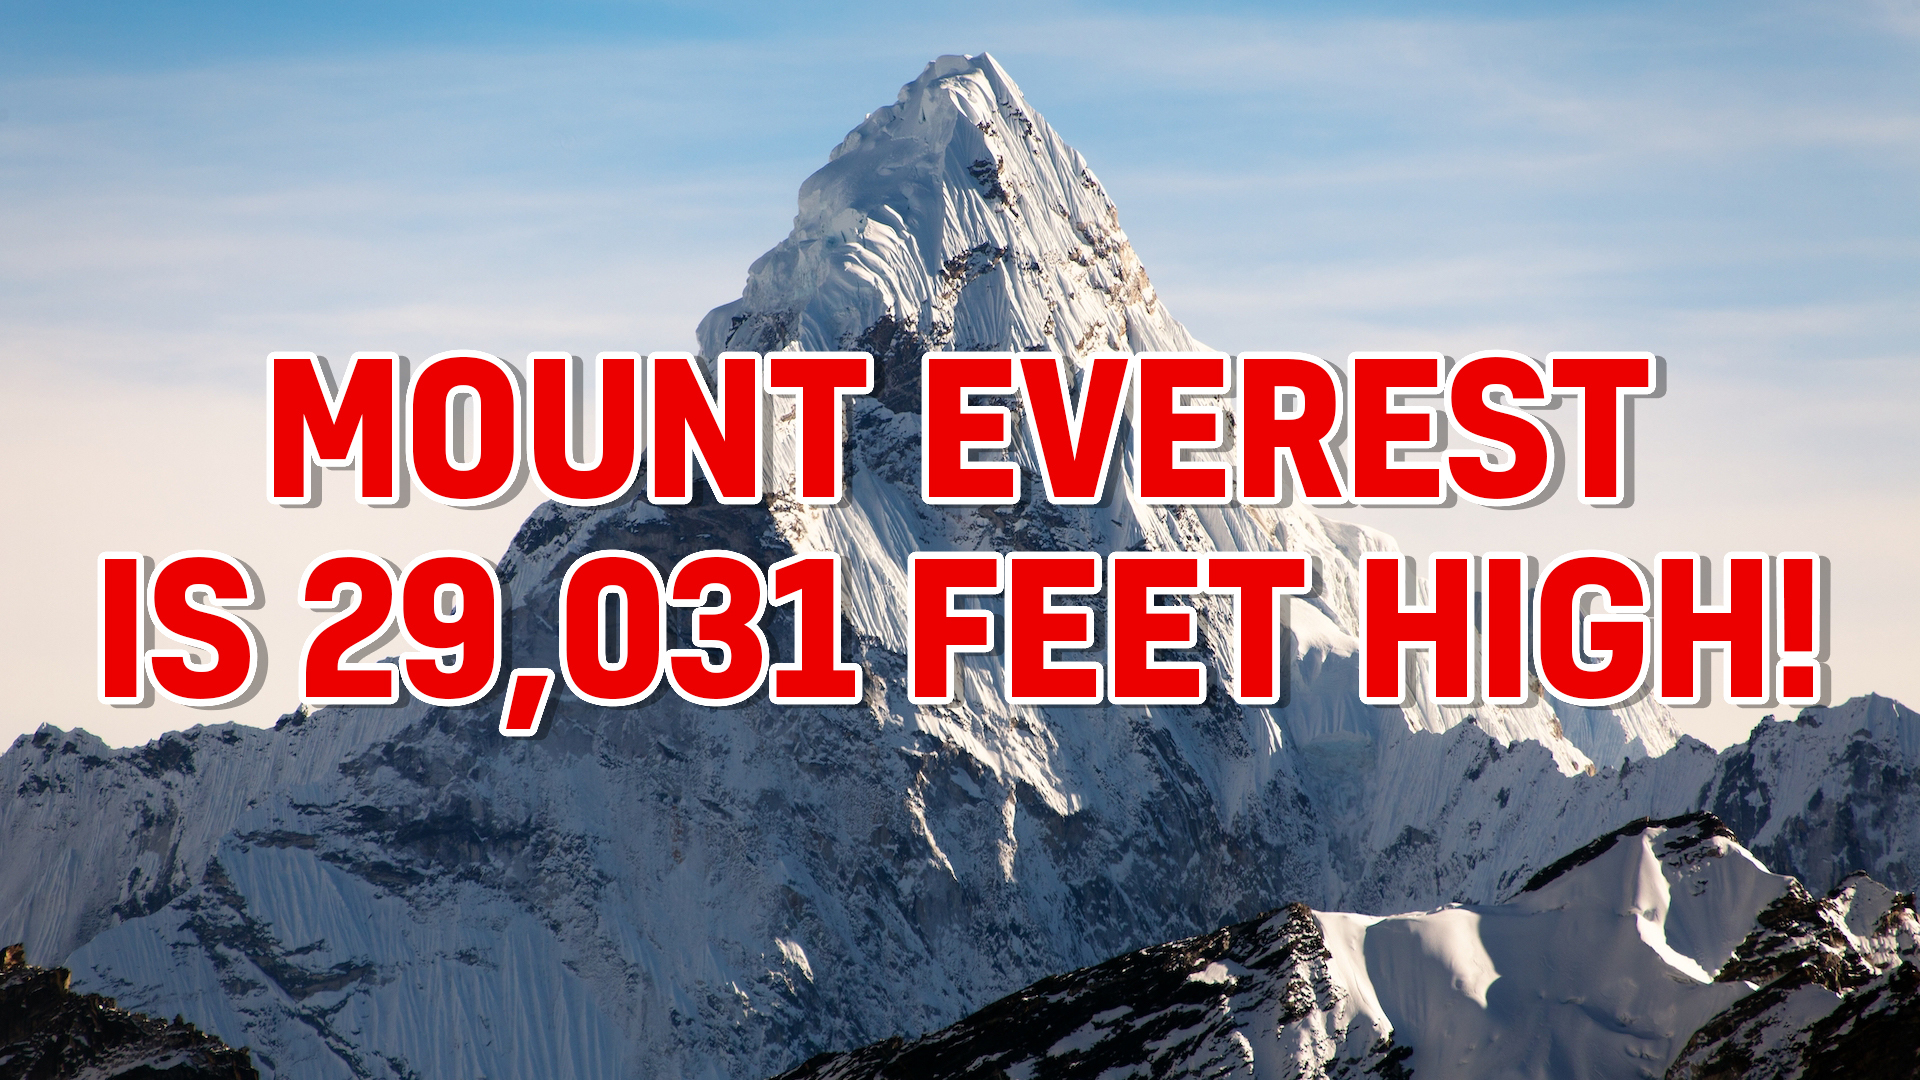 Mount Everest answer